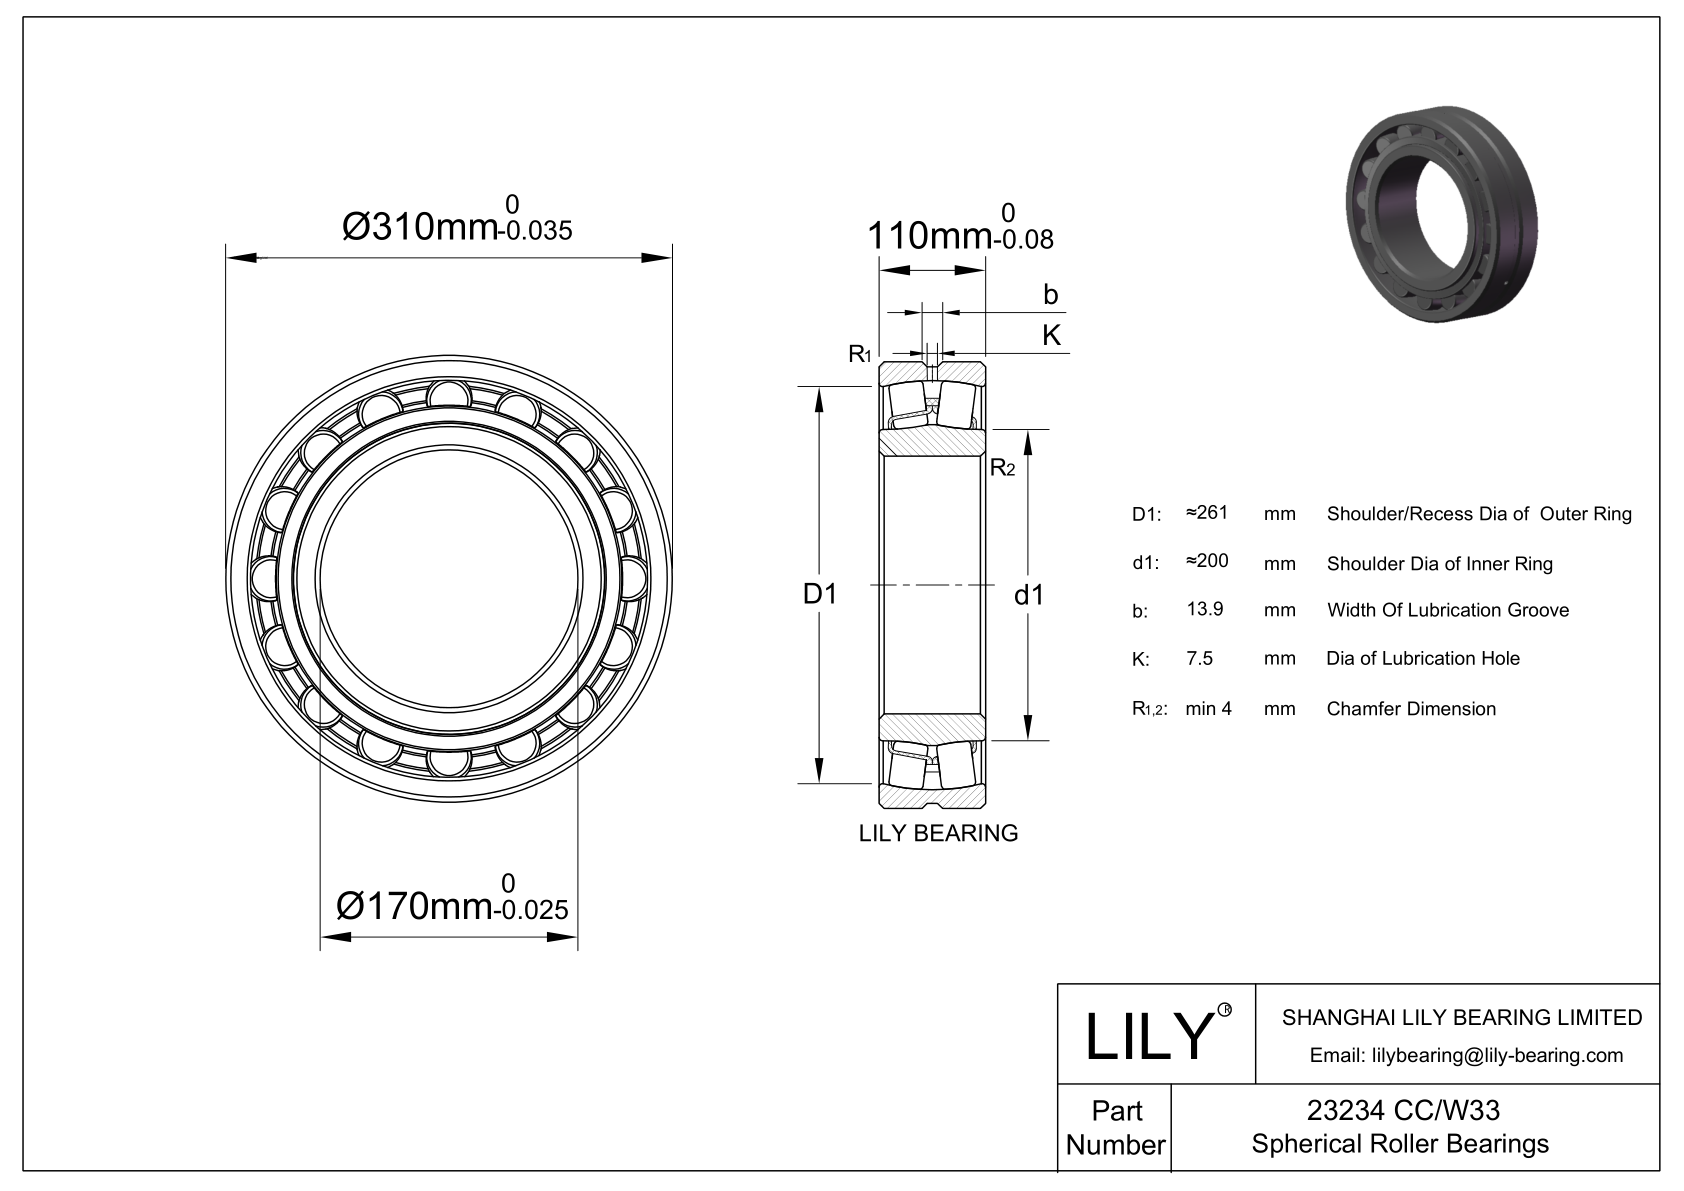 23234 CC/W33 Double Row Spherical Roller Bearing cad drawing